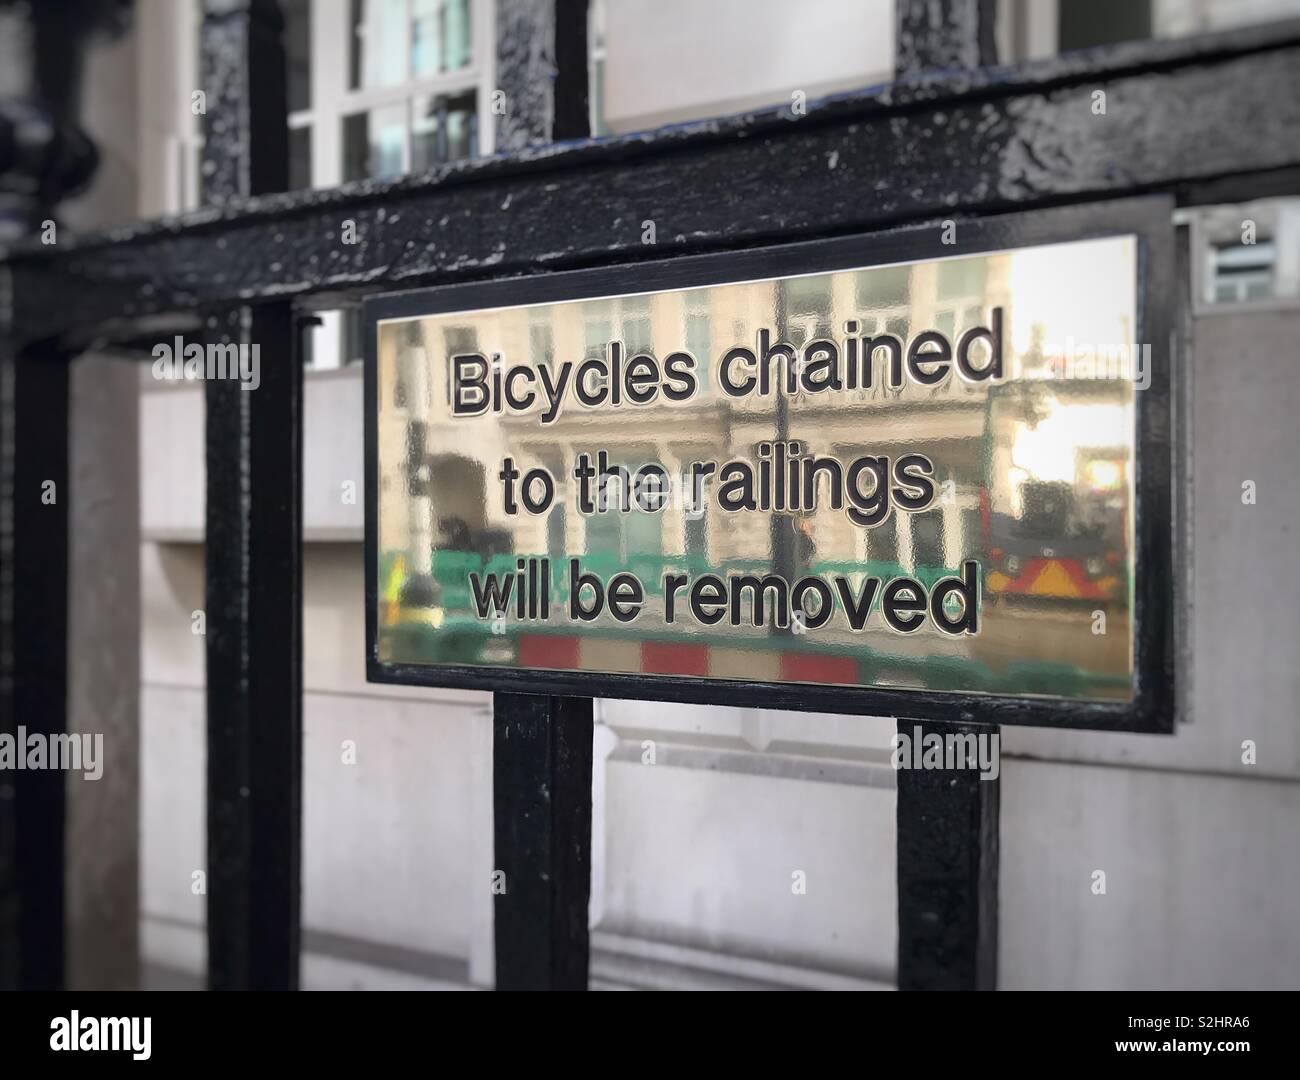 Notice on a brass plate attached to metal railings warning the public that any bicycles chained to the railings will be removed. Stock Photo